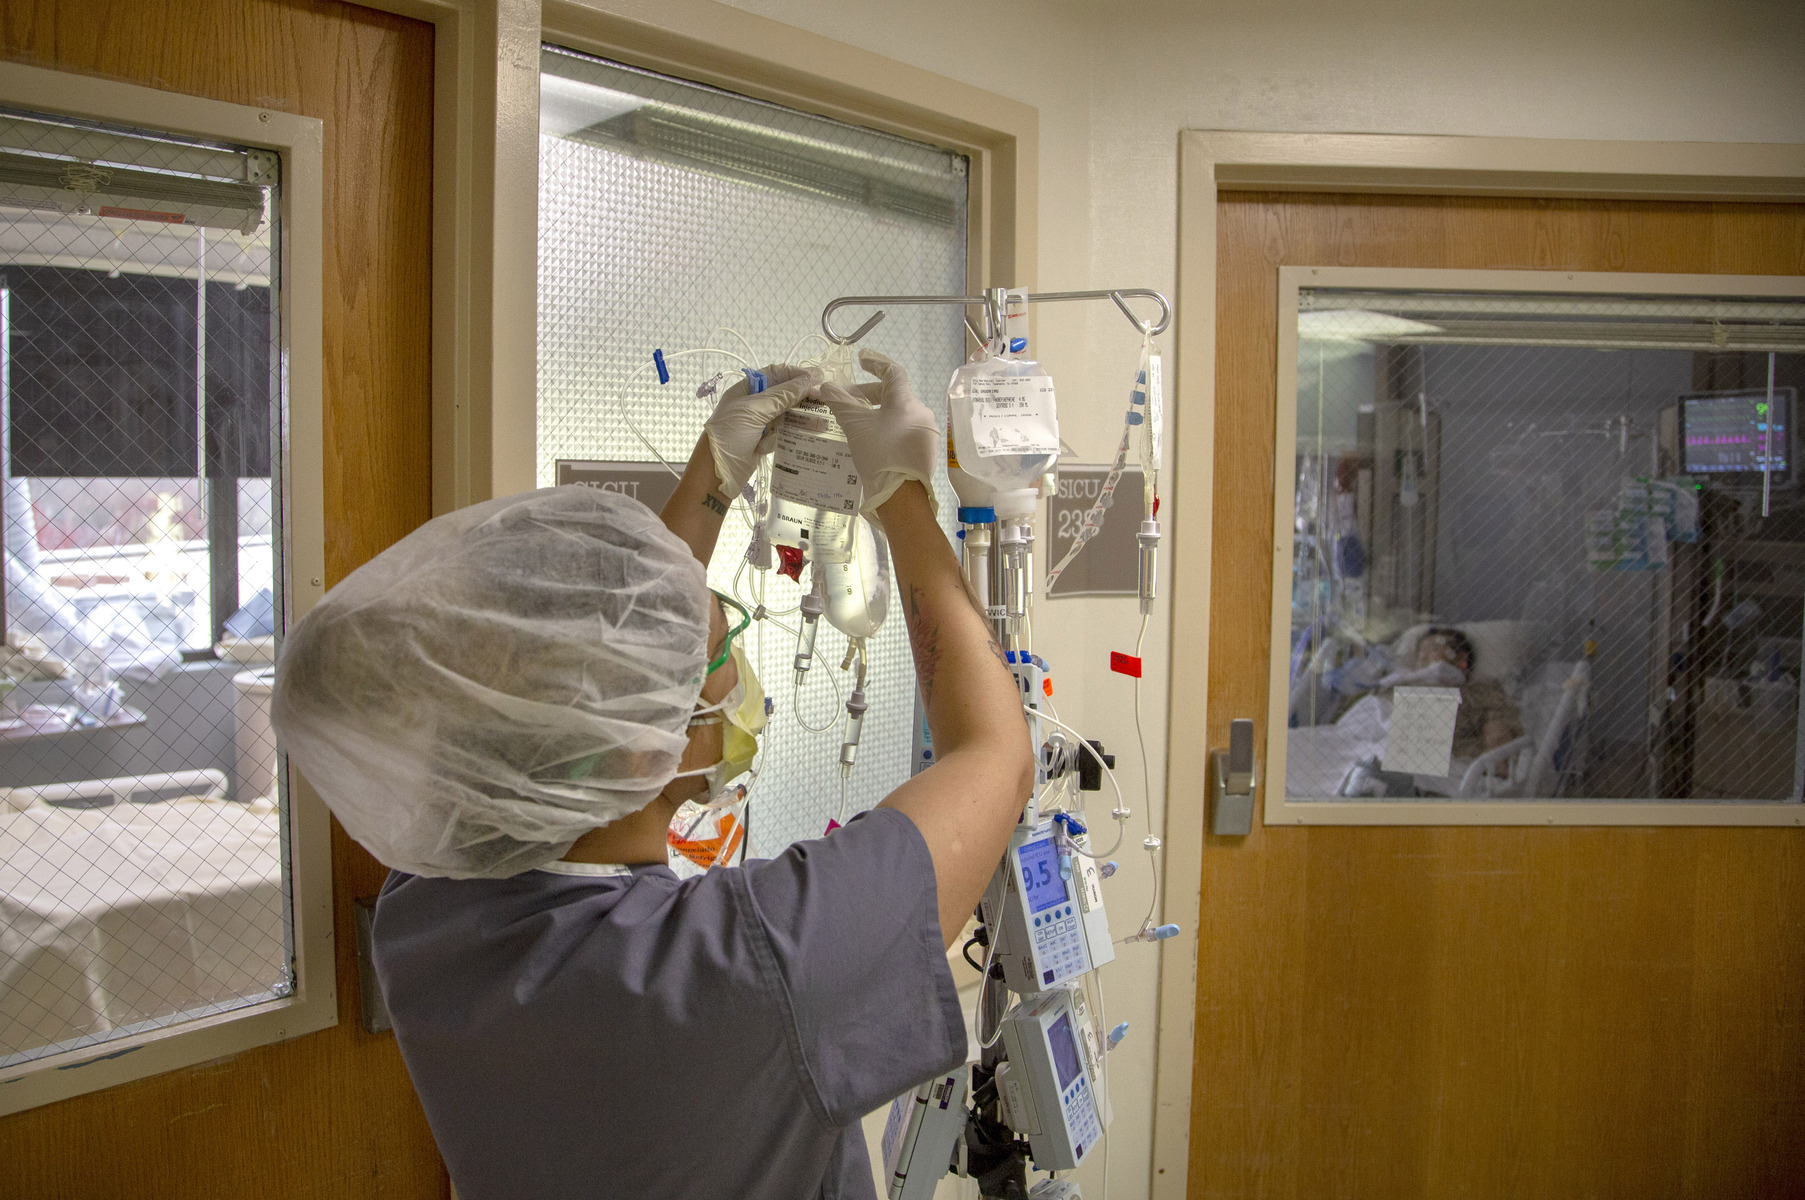 AN ICU nurse hangs medication on an IV pole during the first days of the COVID-19 Pandemic at Holy Name Medical Center in Teaneck, New Jersey. 03/19/2020. Photo by Jeff Rhode/Holy Name Medical Center